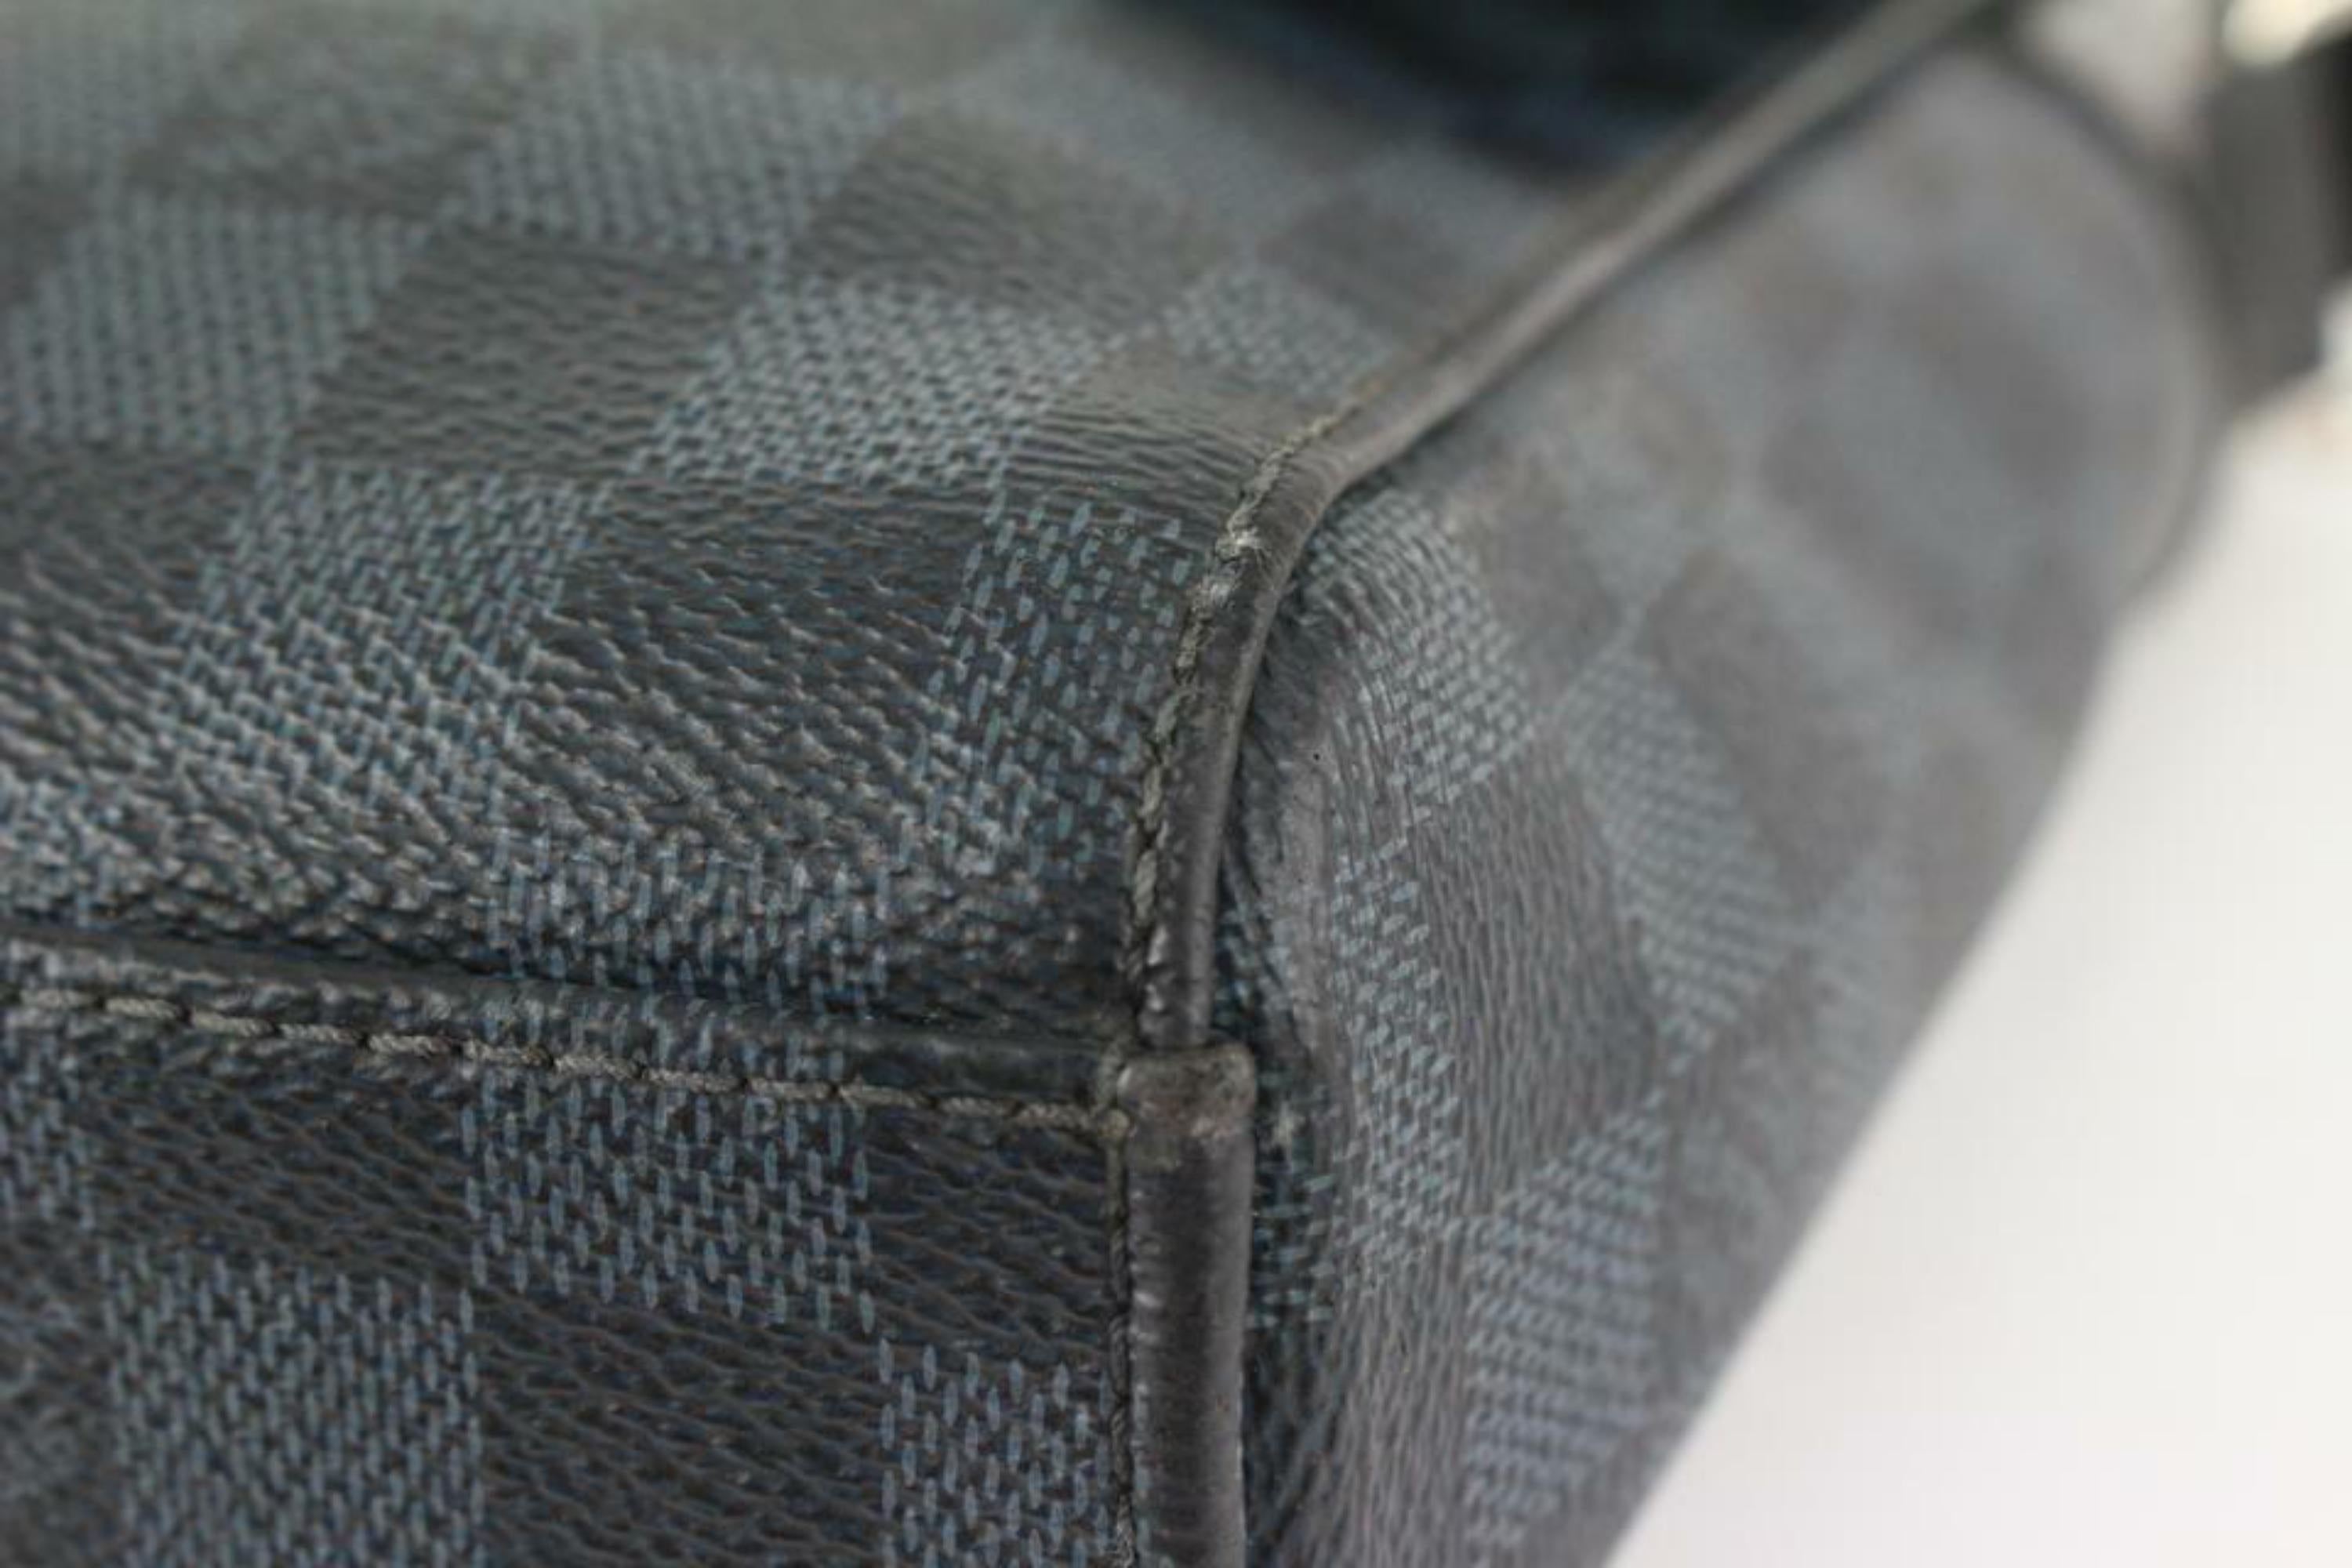 Louis Vuitton Damier Cobalt Newport PM Messenger Crossbody Bag 910lv90 In Good Condition For Sale In Dix hills, NY